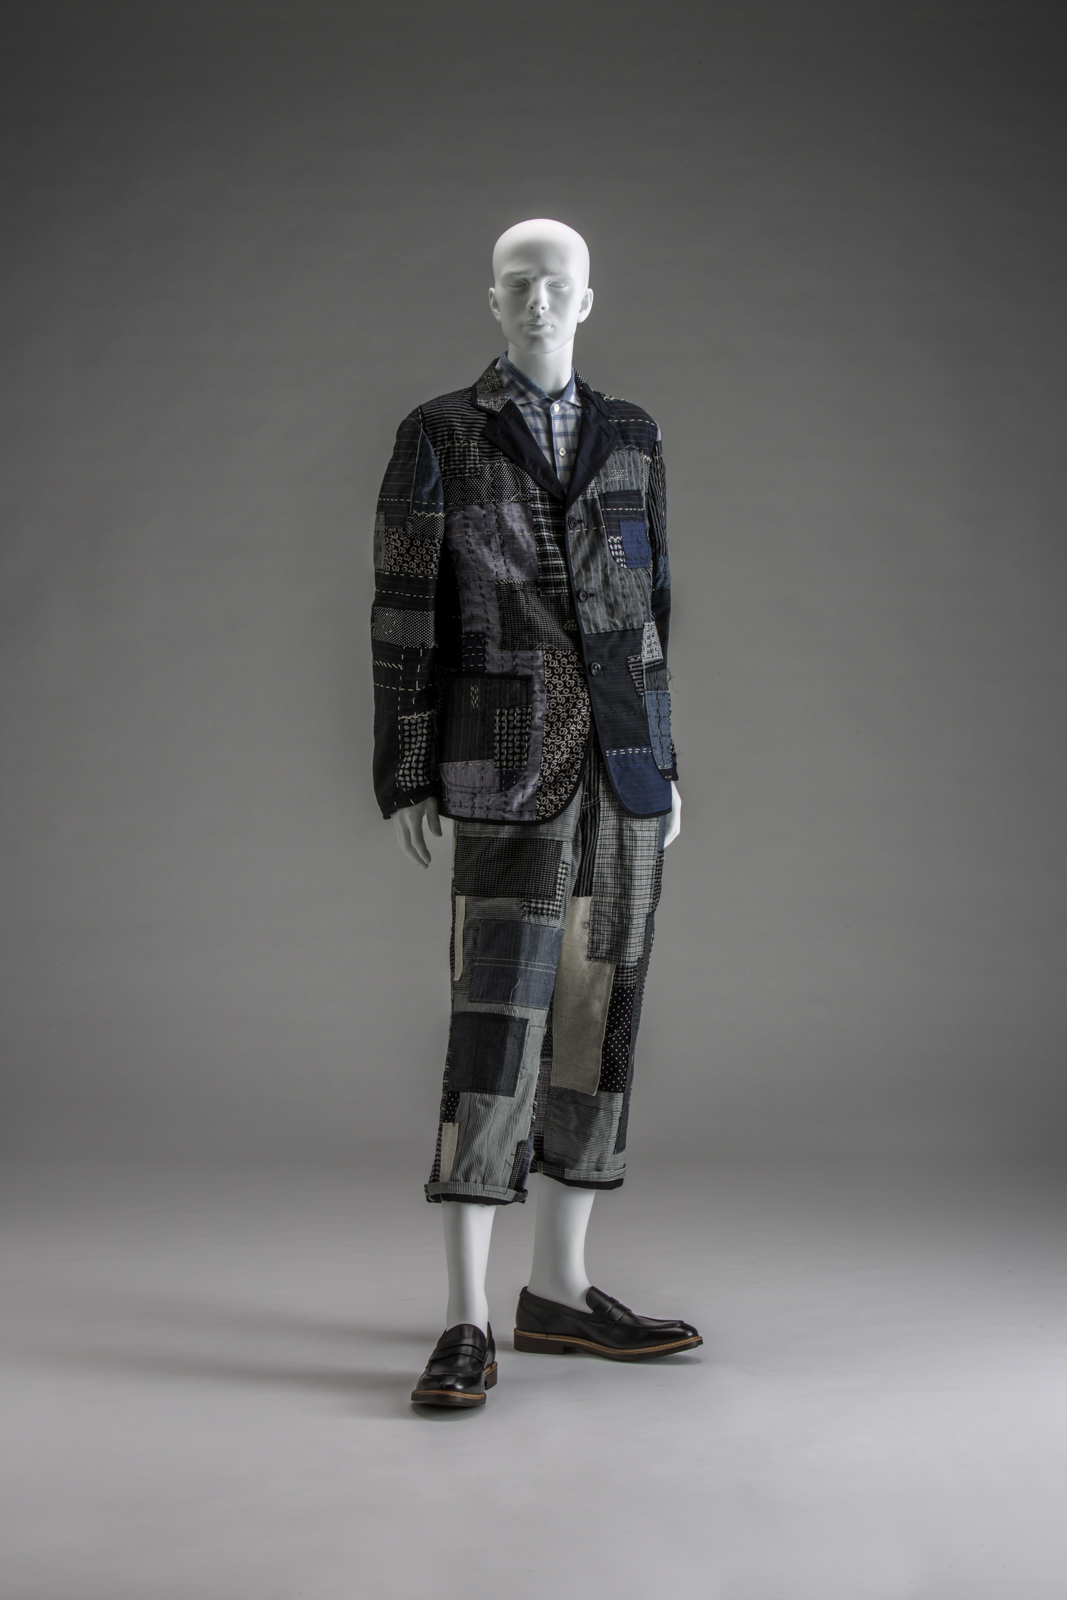 Jacket, shirt, and trousers, Spring/Summer 2015, by Junya Watanabe (Japanese, b. 1961) for Junya Watanabe Comme des Garçons Man. Jacket: Multiple fabric types (approximately fifteen) including cotton, wool, linen, rayon, and polyester; shirt: cotton plain weave; trousers: multiple types of cotton and linen (approximately fifteen). Collection of The Kyoto Costume Institute. © The Kyoto Costume Institute, photo by Takashi Hatakeyama.
